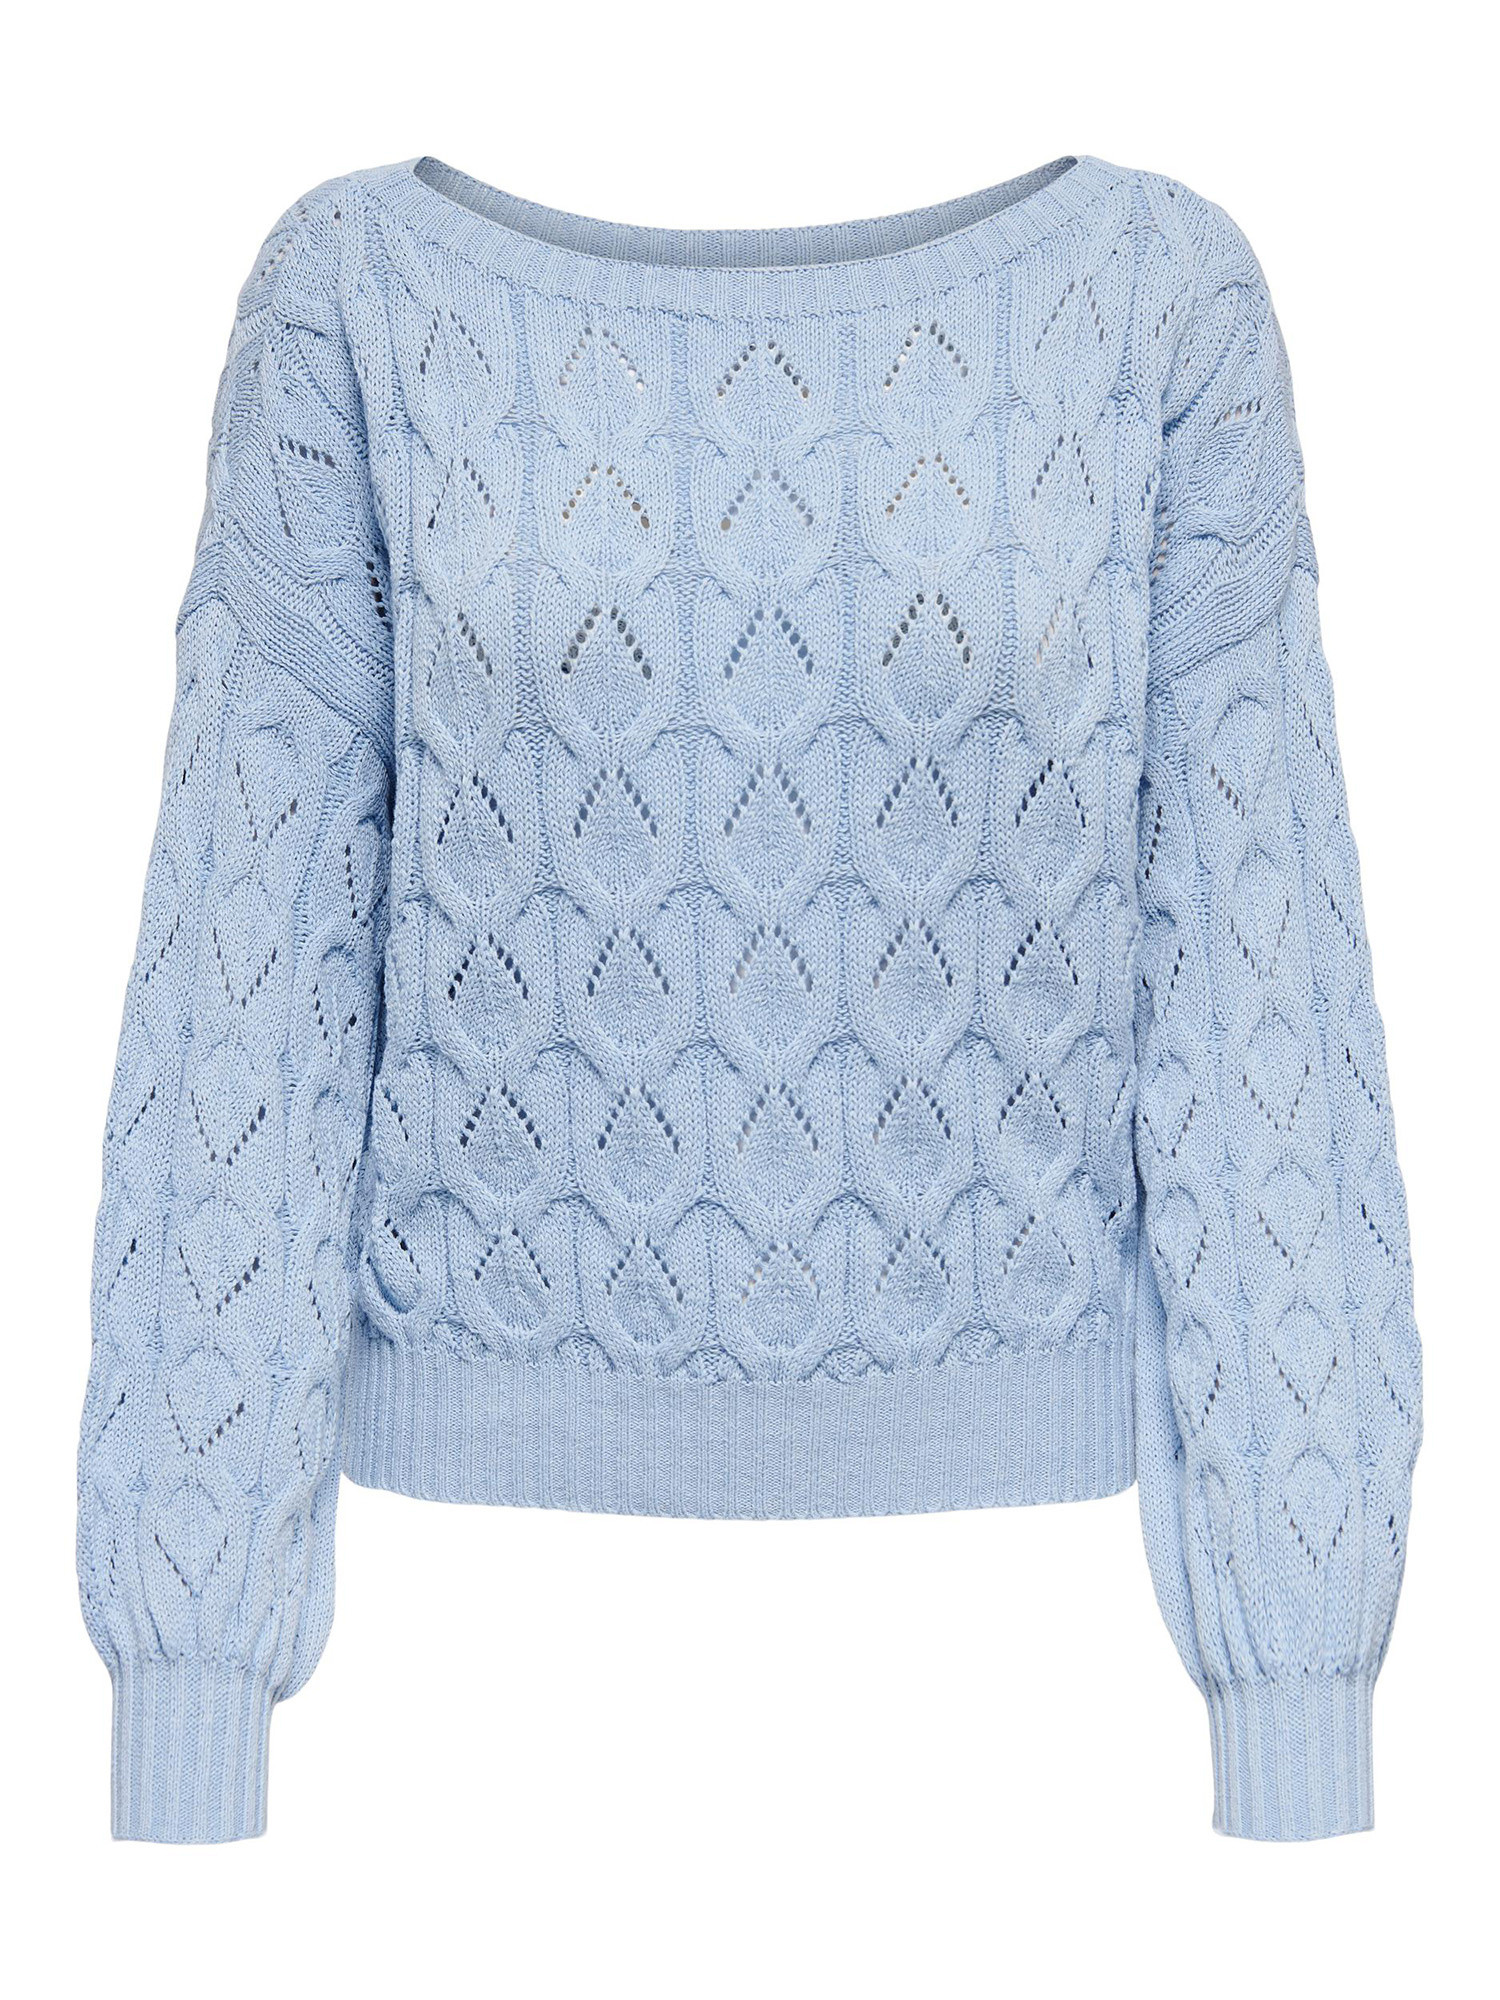 Only - Boat neck pullover with pointelle detail, Light Blue, large image number 0